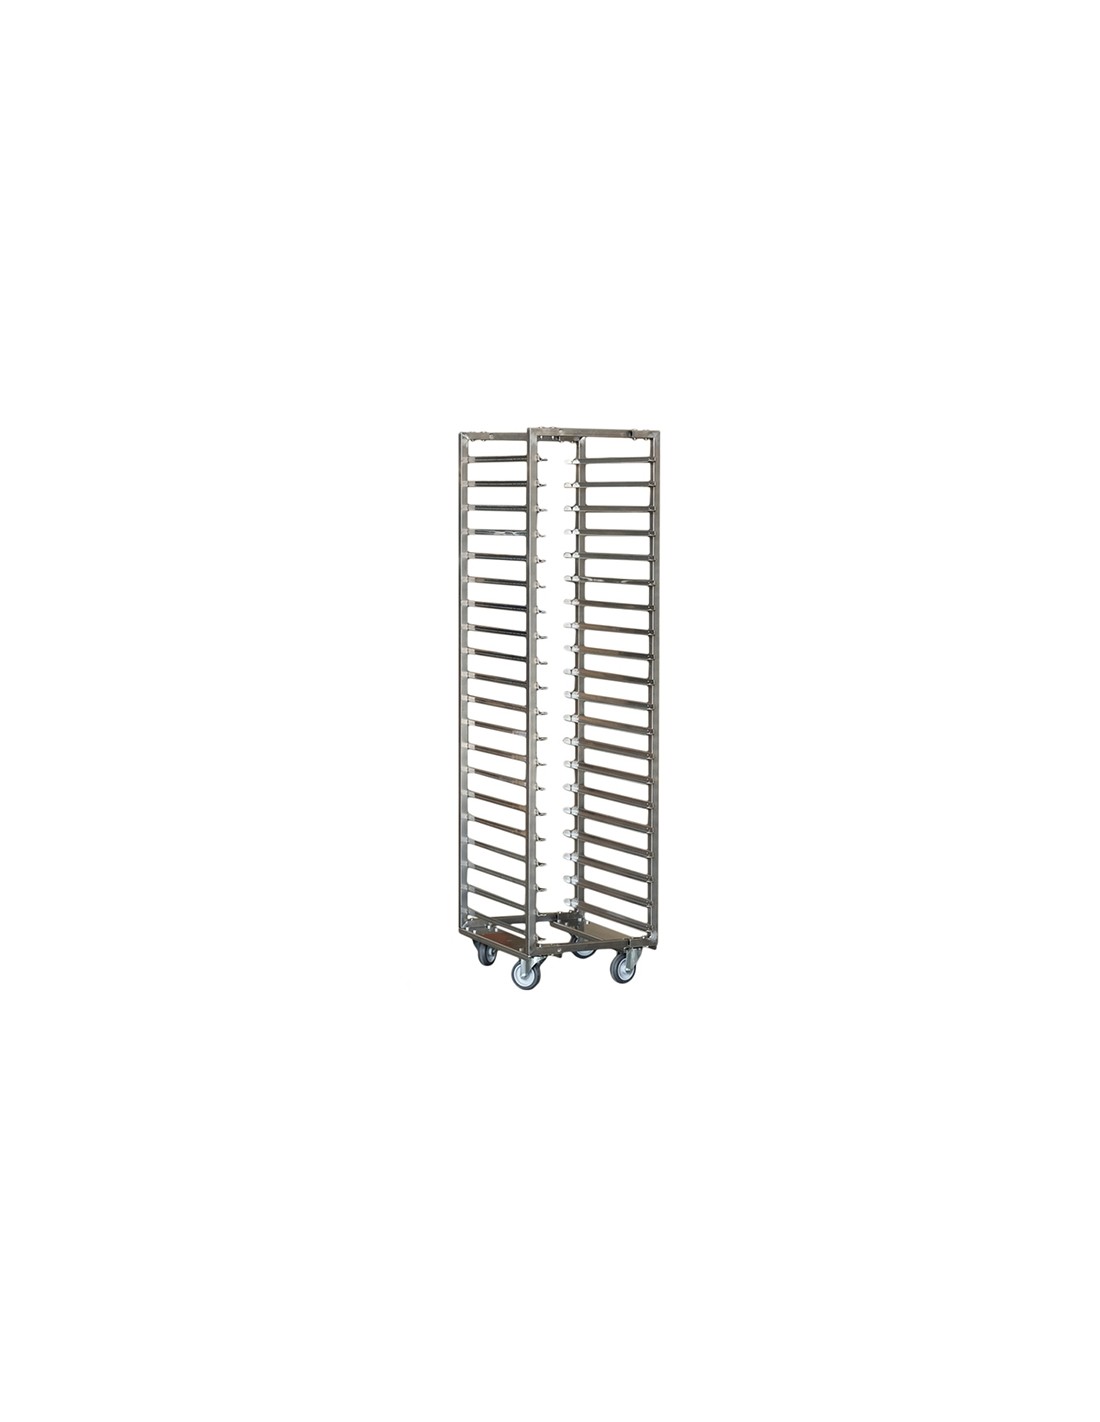 Board trolley 60 x 40 - Stainless steel - Service - With 16 shelves - Step 100 mm - Not available in the cooking room